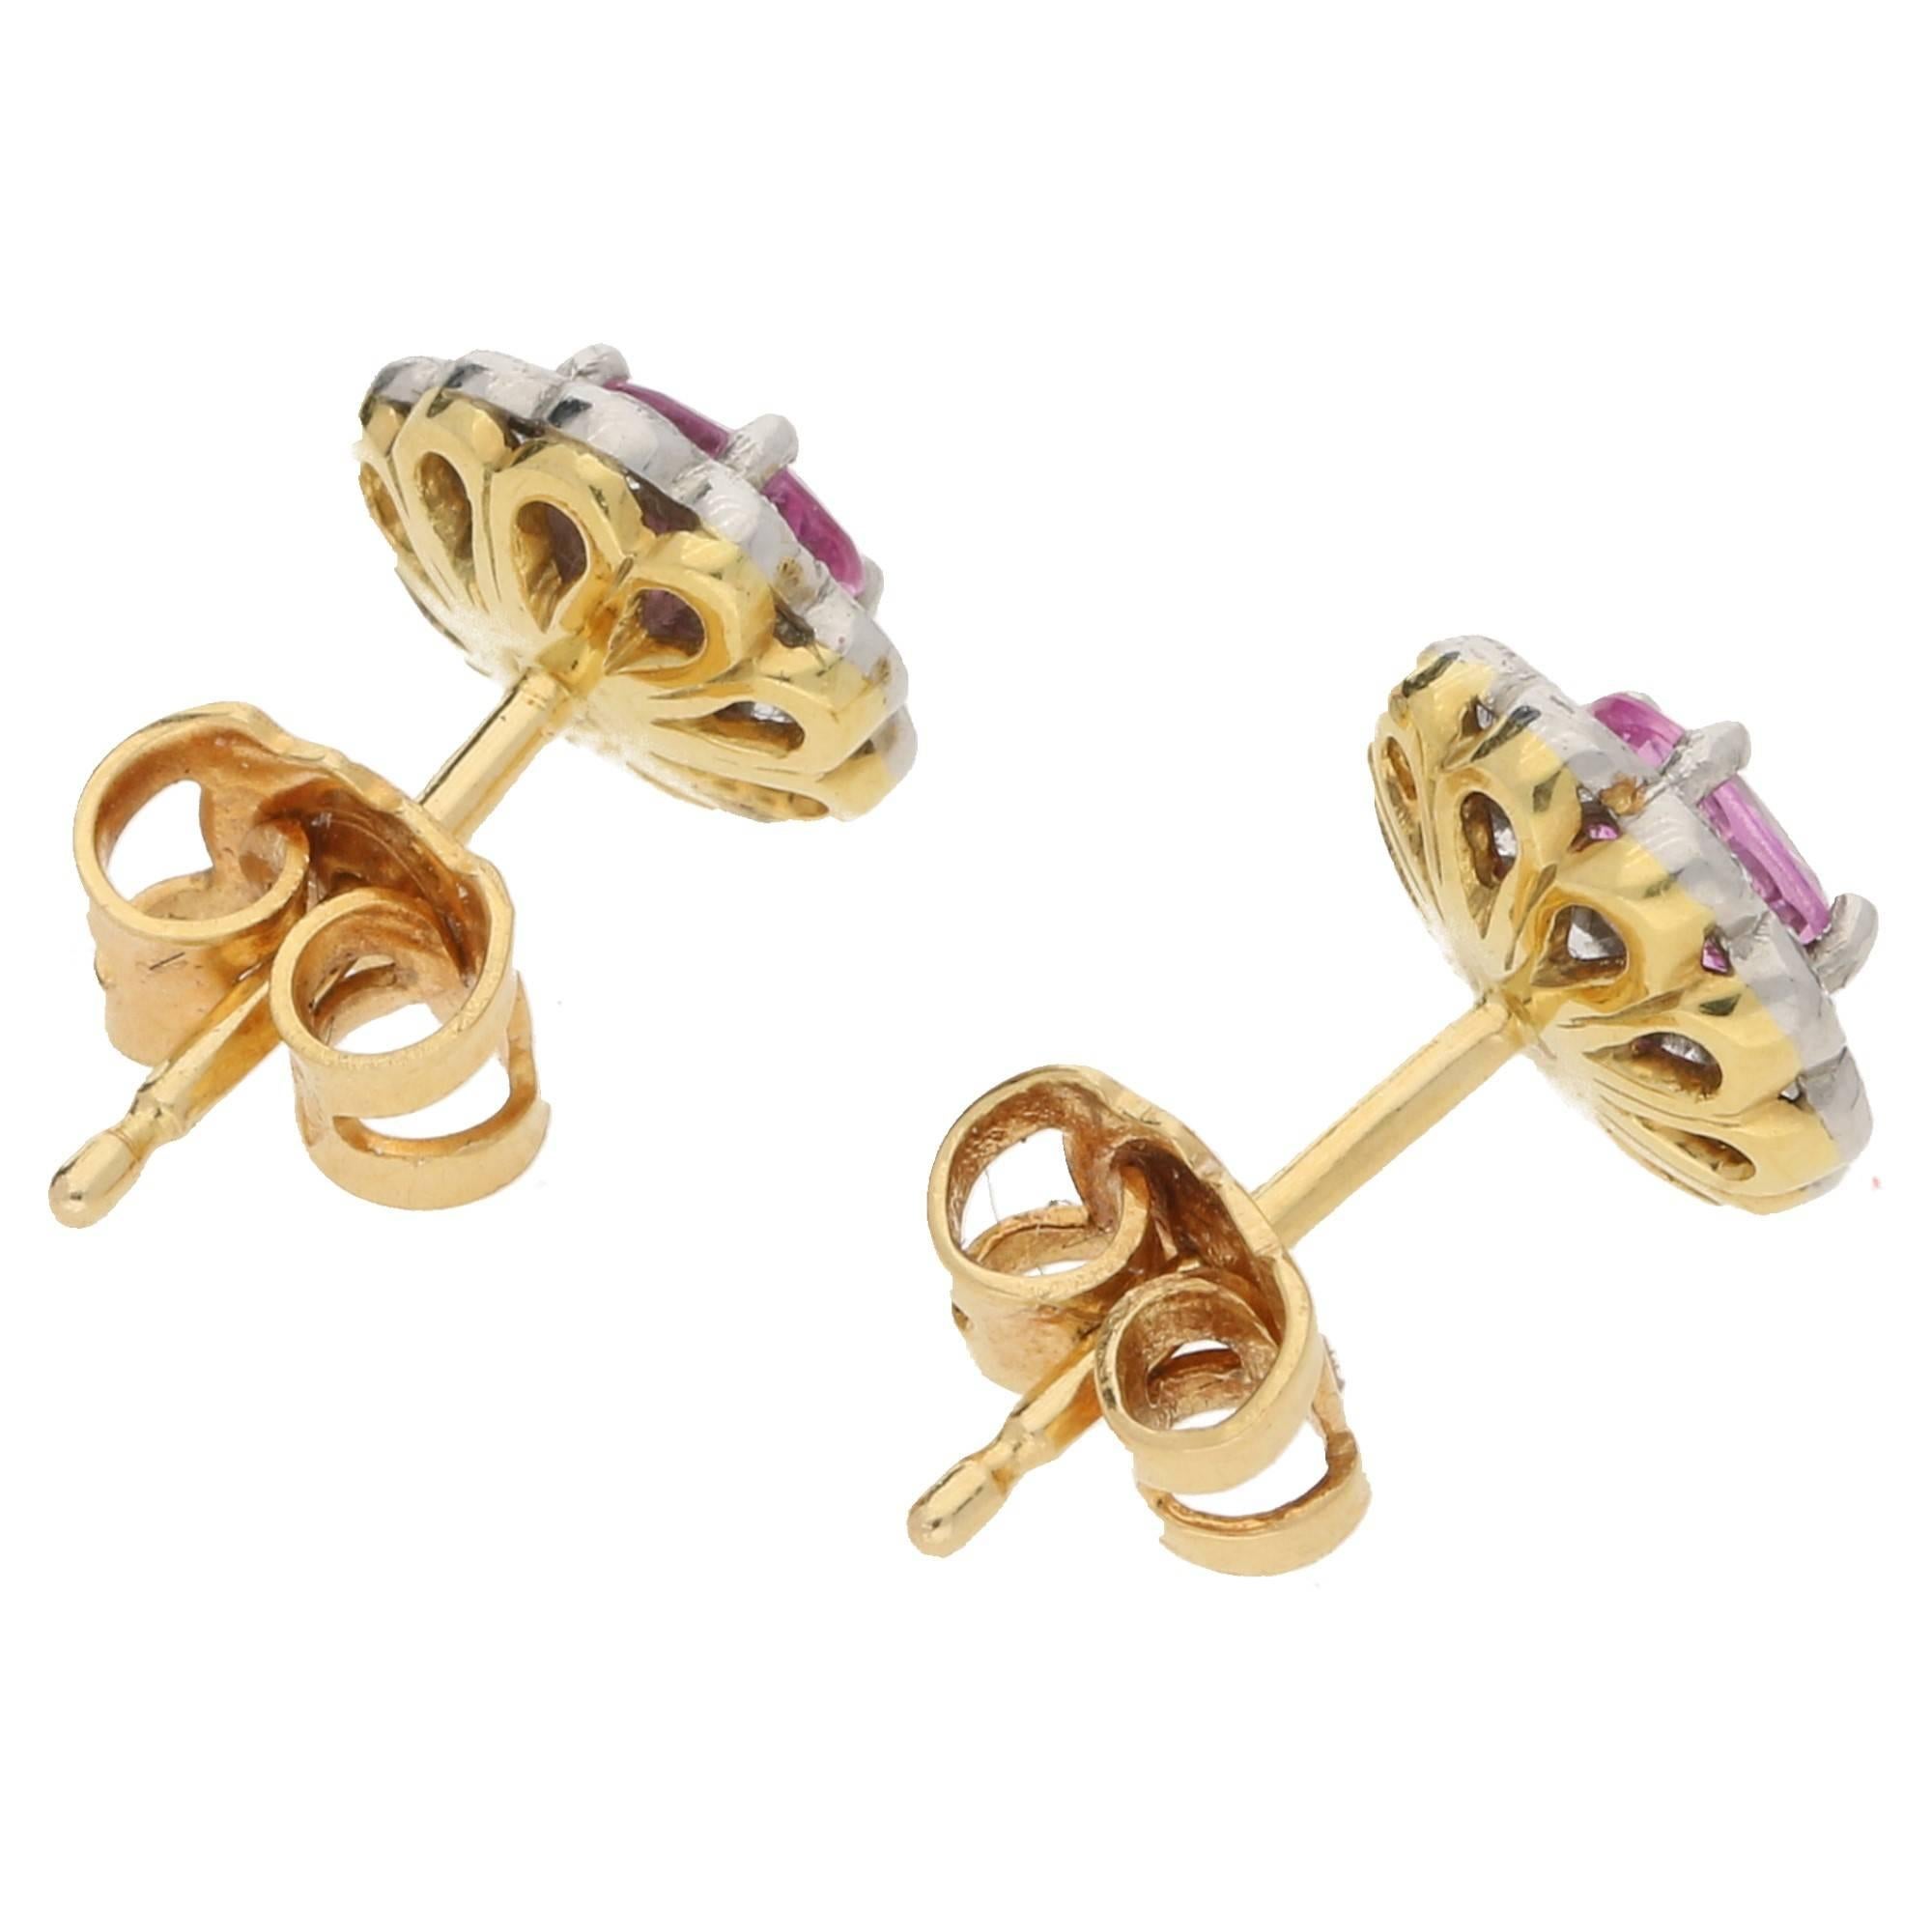 A fanciful pair of oval pink sapphire and diamond cluster ear studs set in 18ct white and yellow gold. The oval cut pink sapphire is four claw set within a border of ten round brilliant cut diamonds scallop set in mille grain edged 18ct white gold.